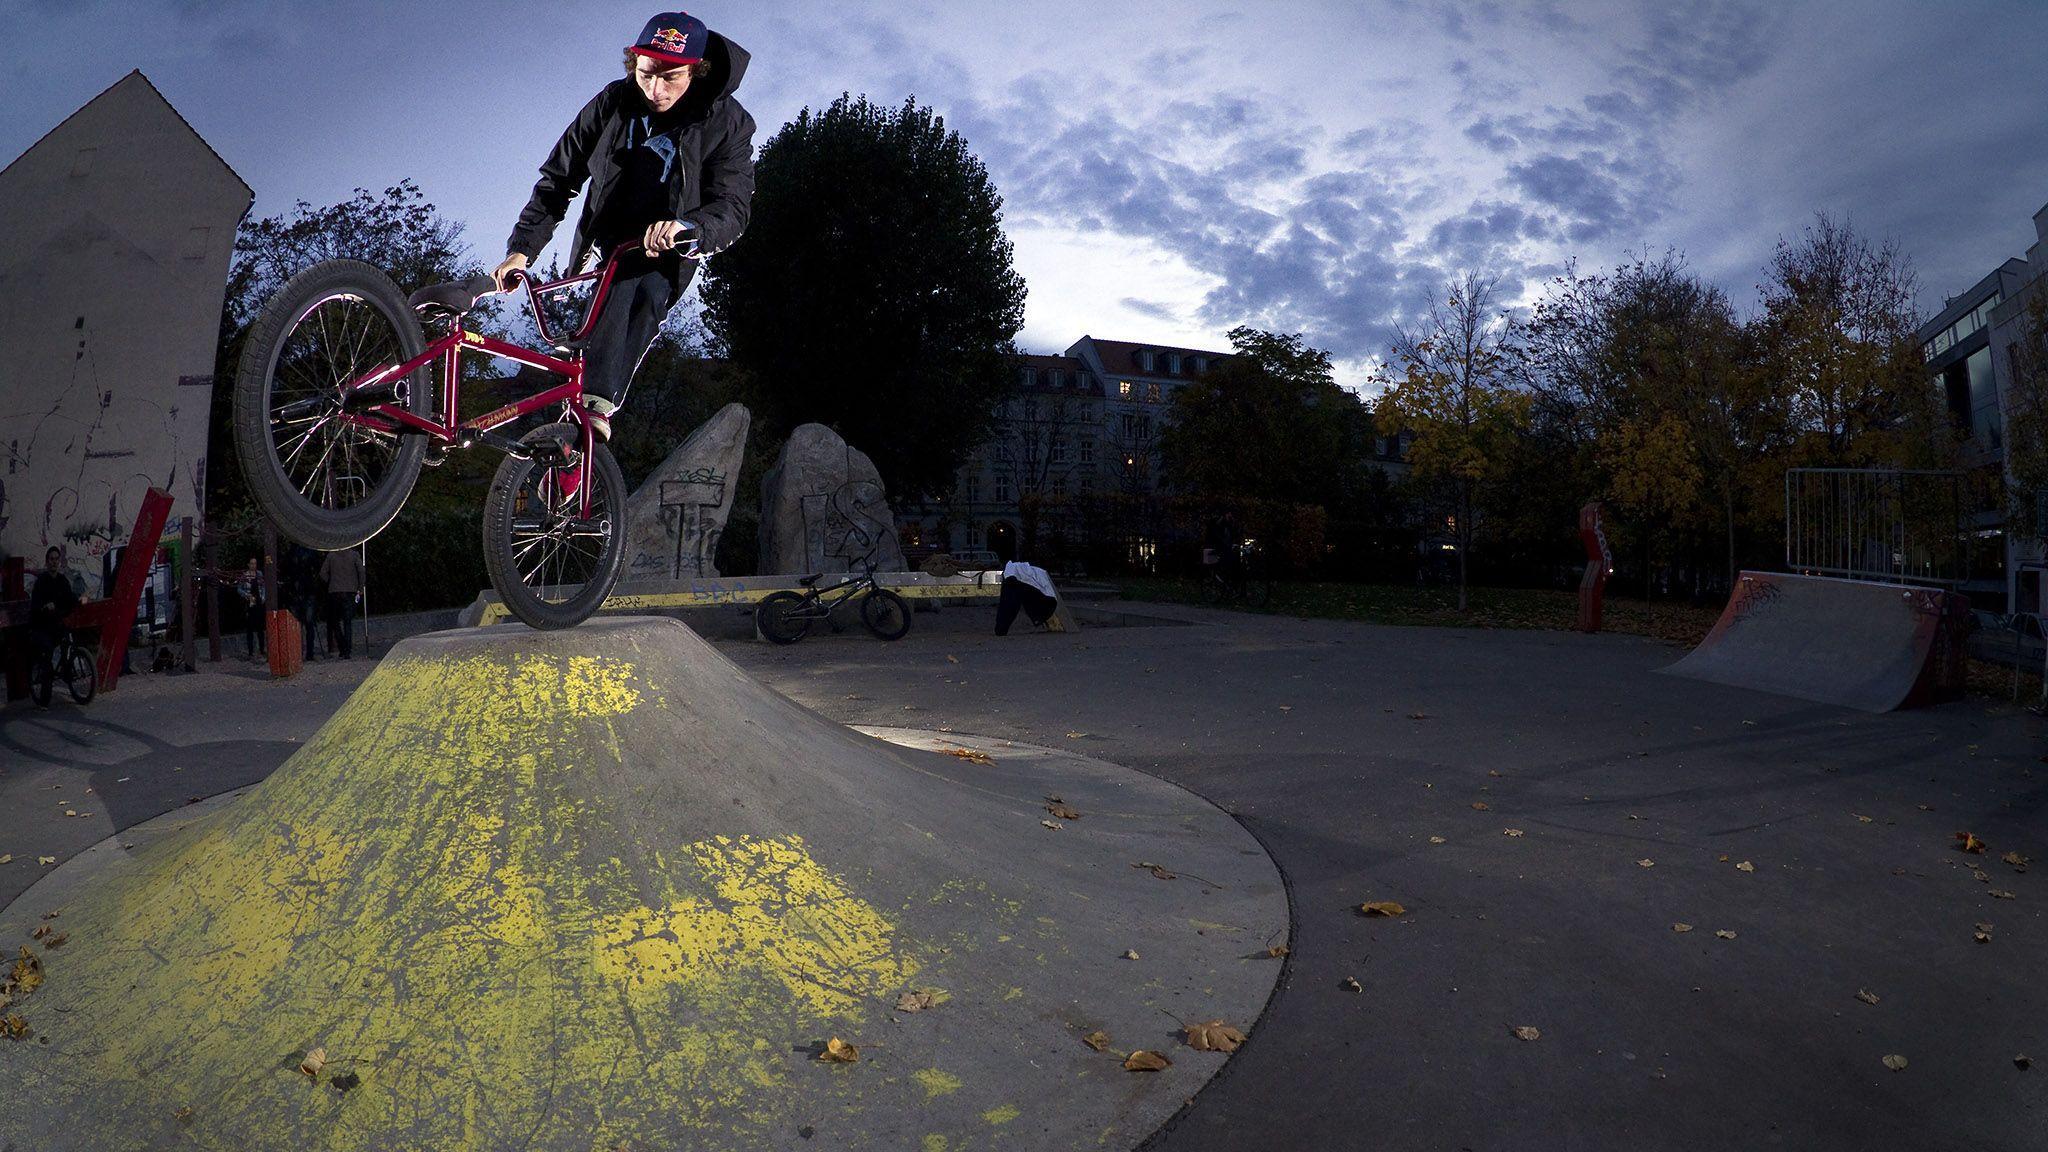 X Games travels to Munich, home to thriving winter and summer